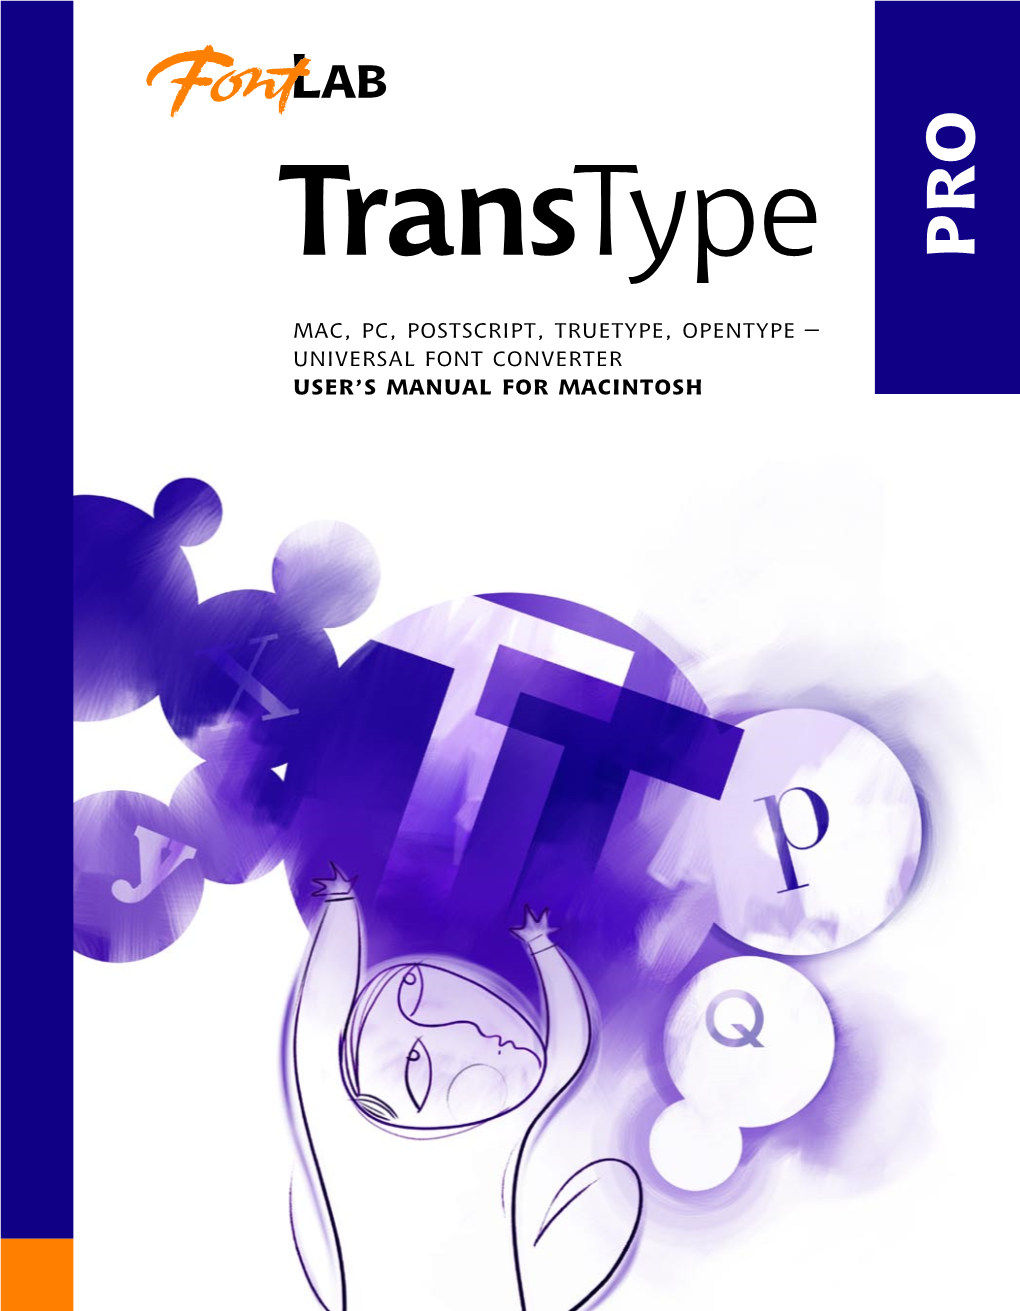 Manual of Transtype Pro 3.0 Mac OS, OS X in Array